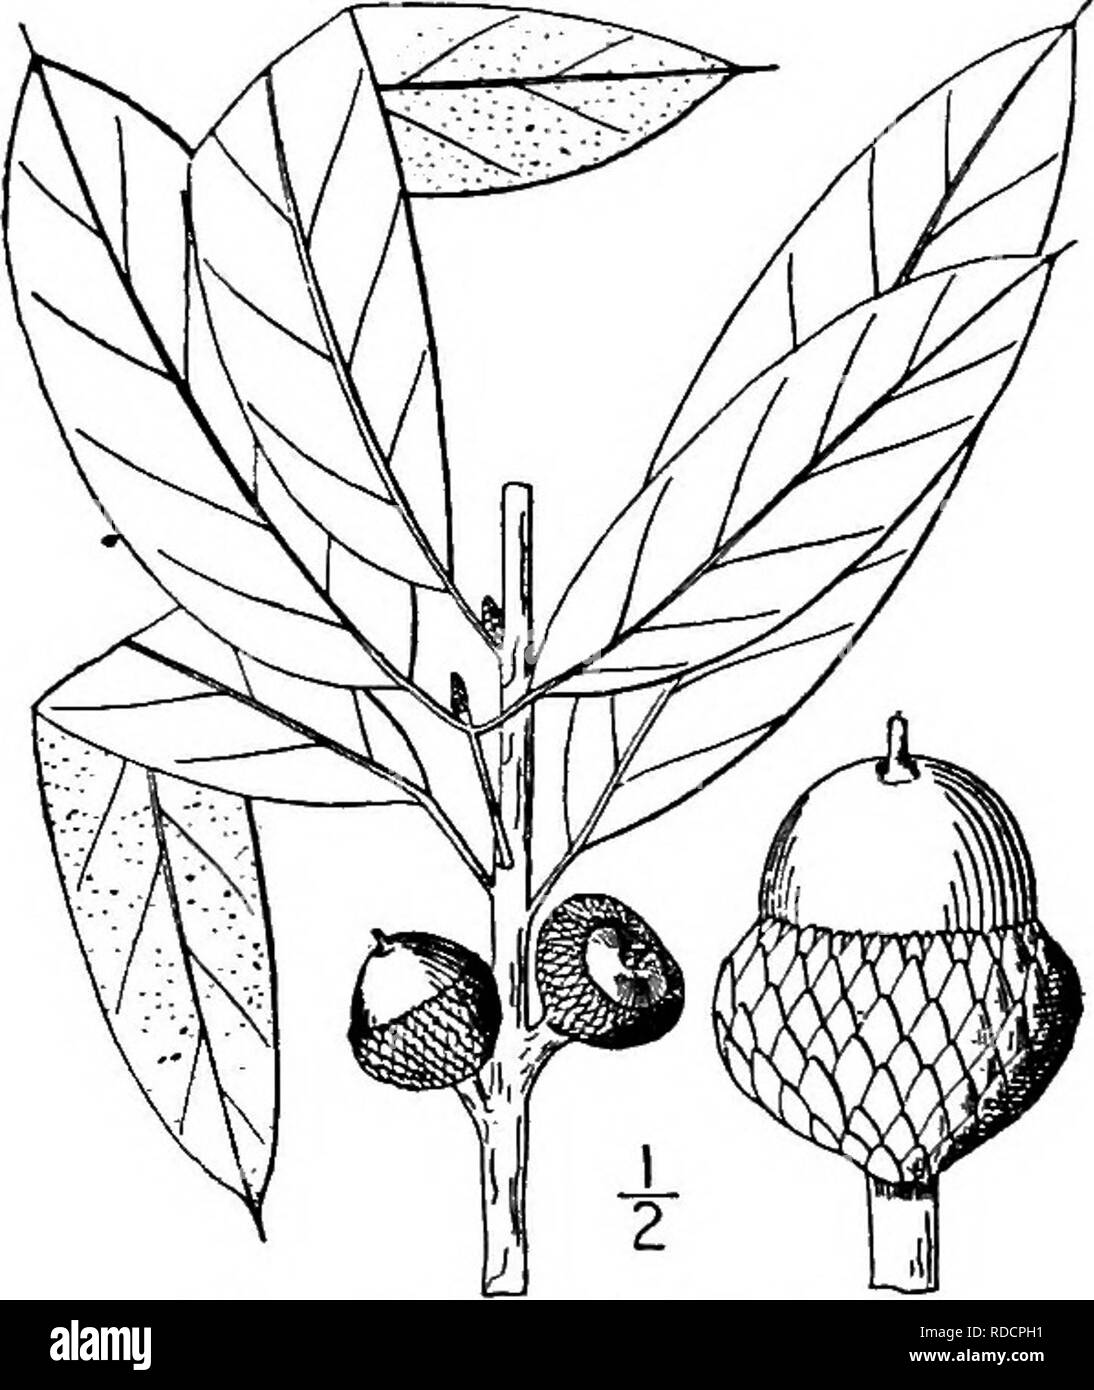 . North American trees : being descriptions and illustrations of the trees growing independently of cultivation in North America, north of Mexico and the West Indies . Trees. 304 The Oaks. 21. SHINGLE OAK — Quercus imbricaria Michaux A tree of rich woods from Pennsylvania to Michigan and Nebraska southward to Georgia and Arkansas, attaining its largest dimensions, 30 meters high with a trunk diameter of 1.2 m., in the central States. It is also known as Laurel oak, Jack oak, and Water oak. The trunk is straight, often free of branches for haK its height, with a round- topped crown; when young  Stock Photo